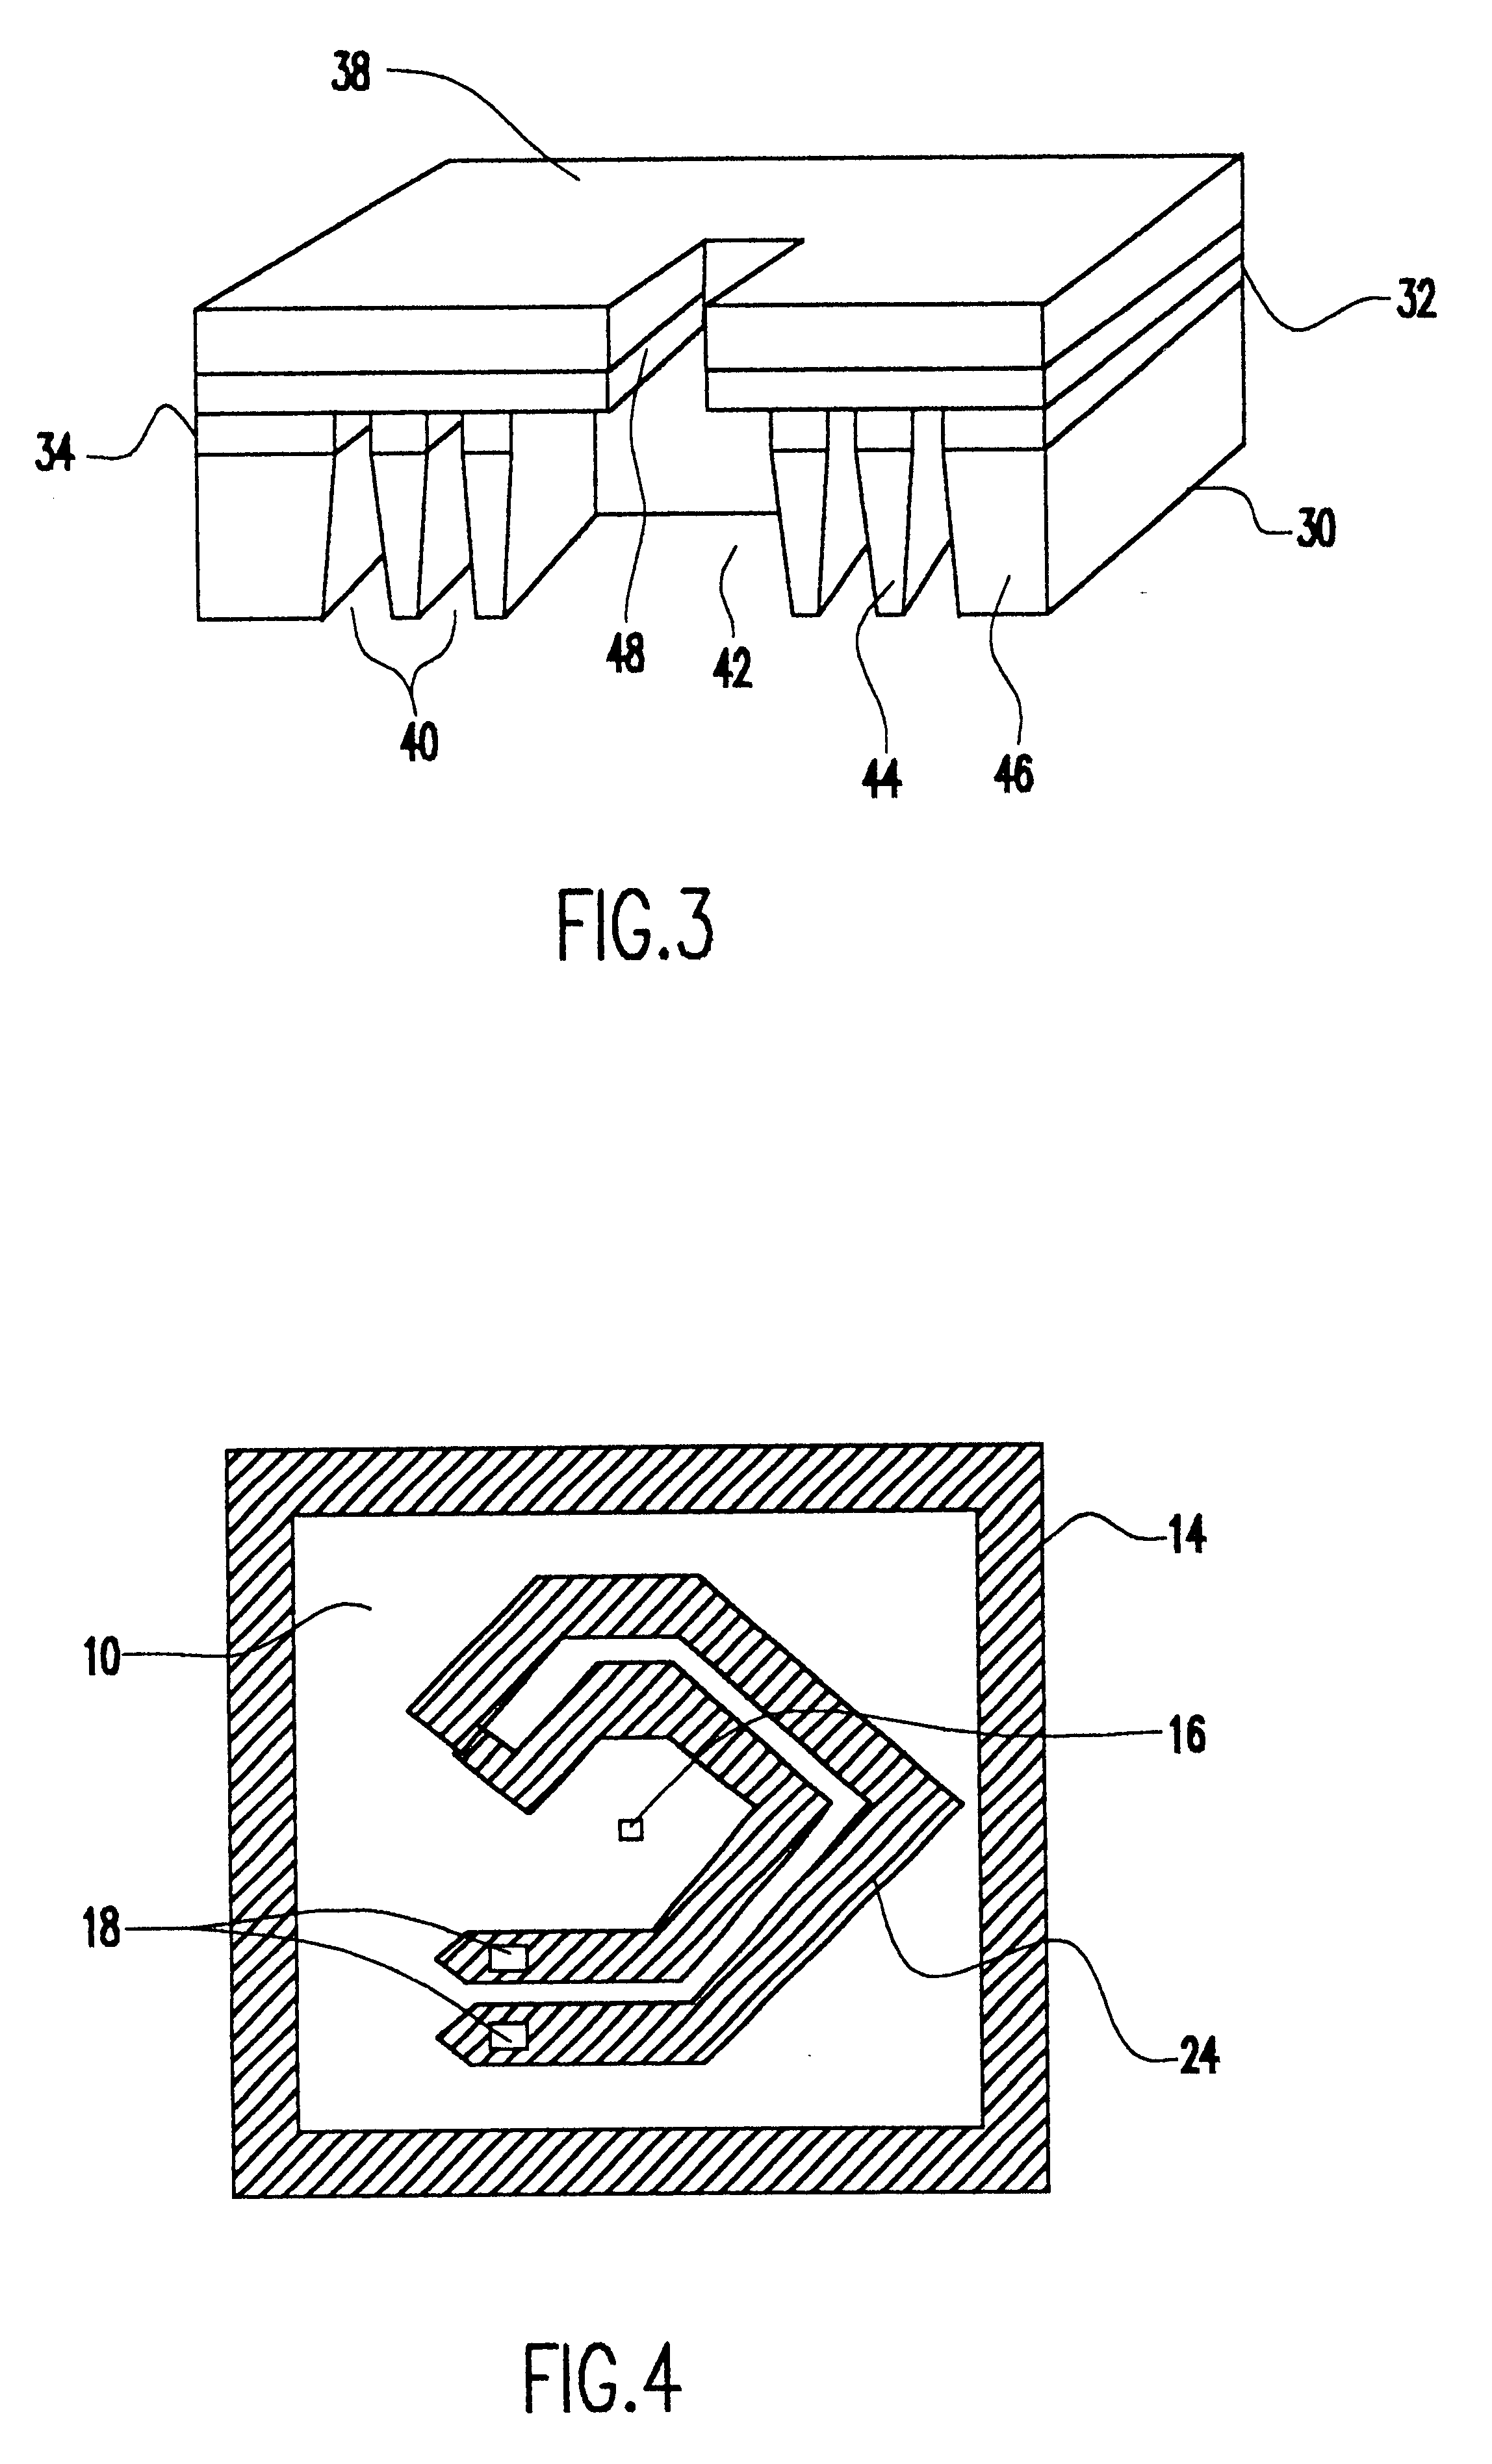 E-beam shape aperature incorporating lithographically defined heater element